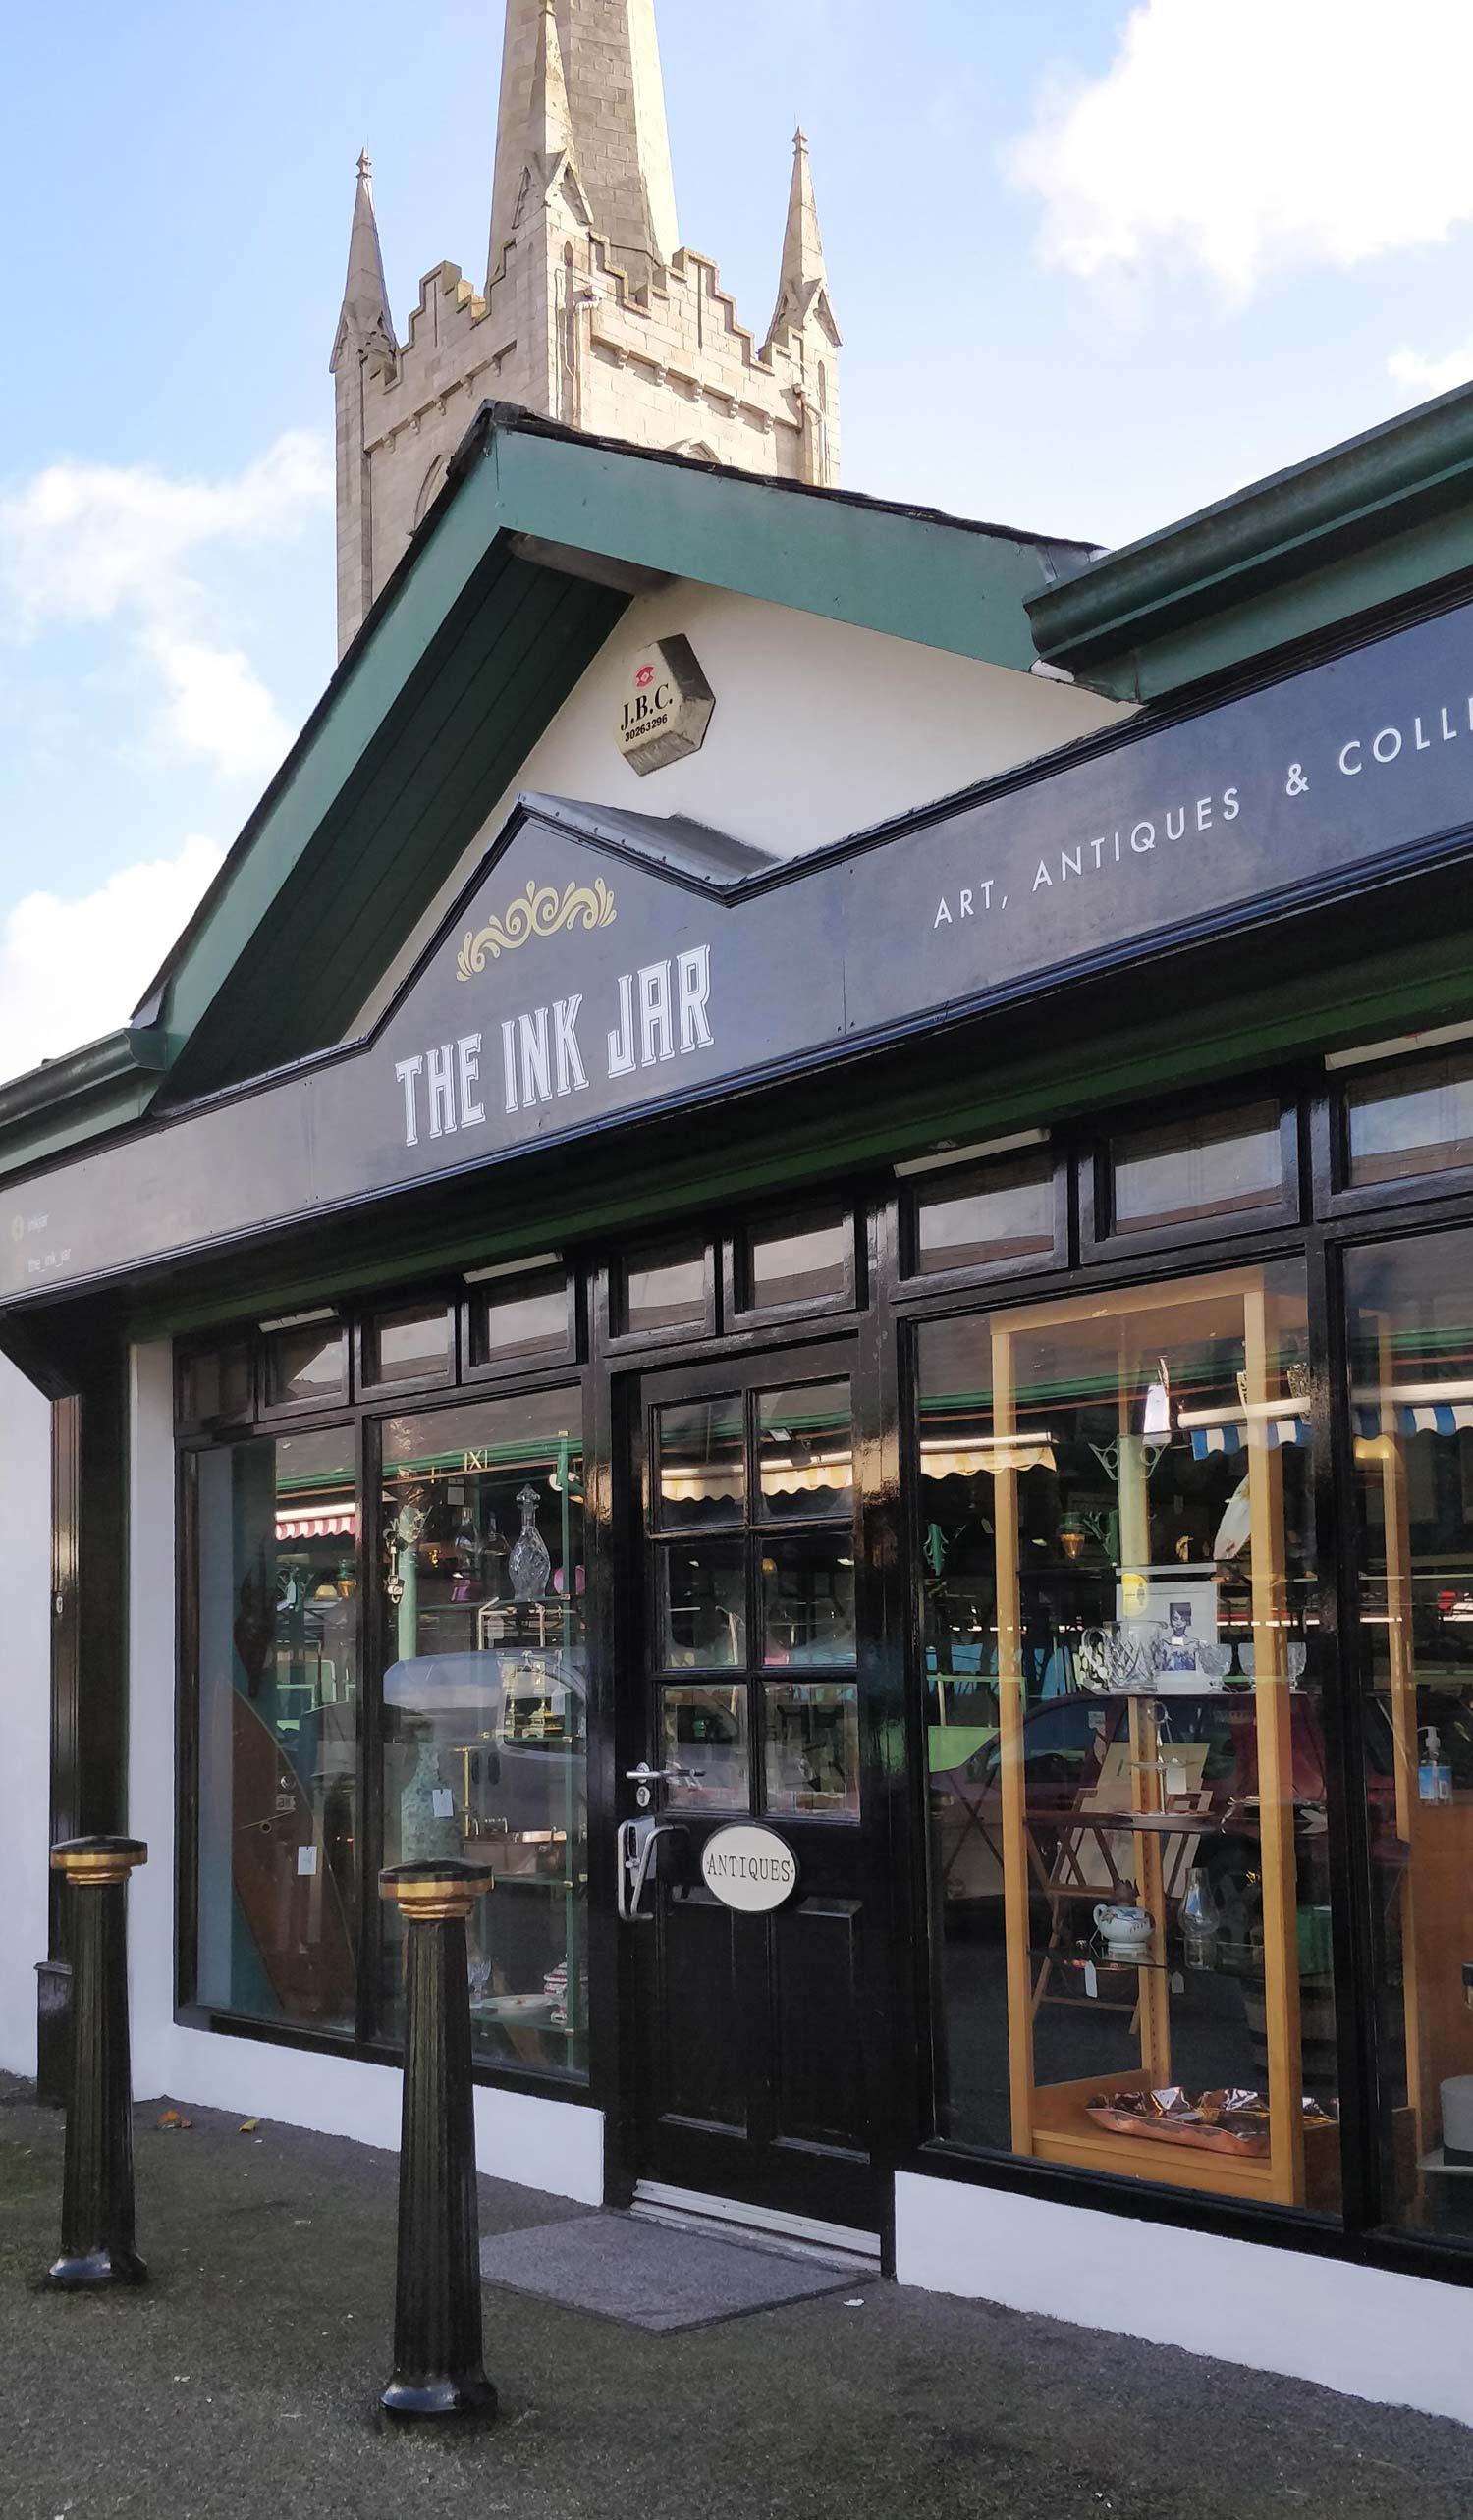 The Ink Jar Antiques and Art Gallery